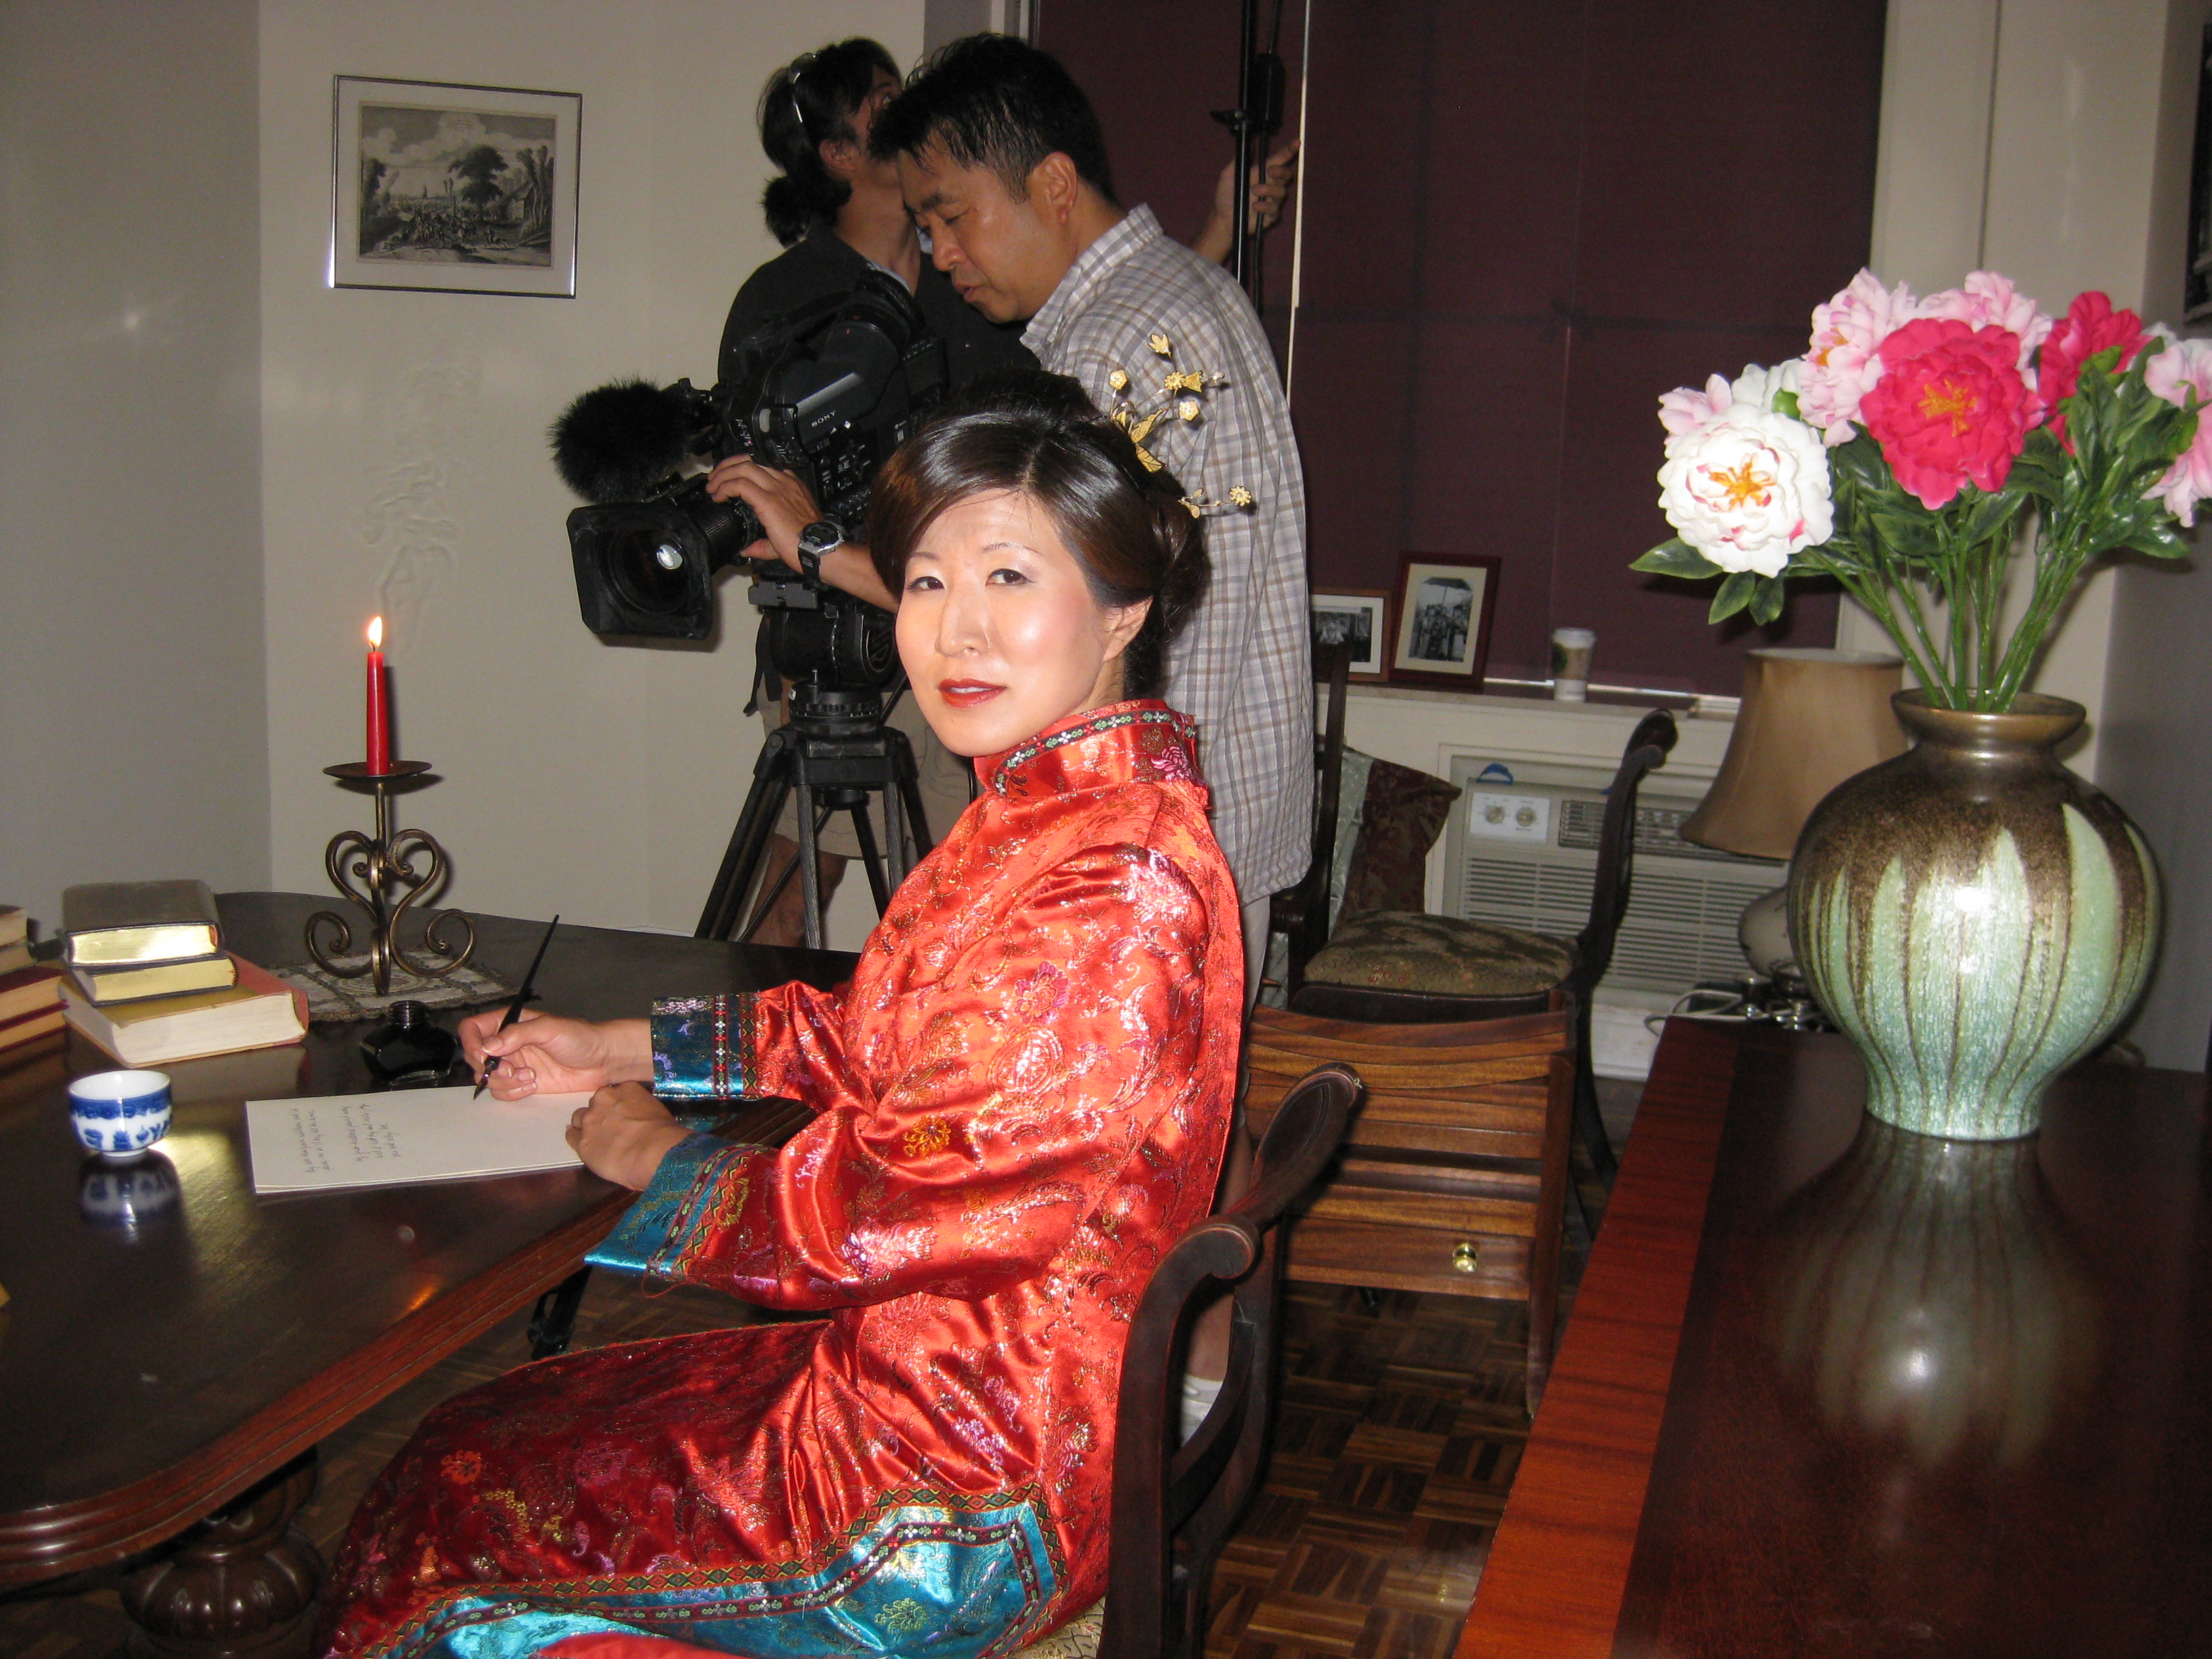 Lil Rhee as Princess Der Ling, sitting at the desk